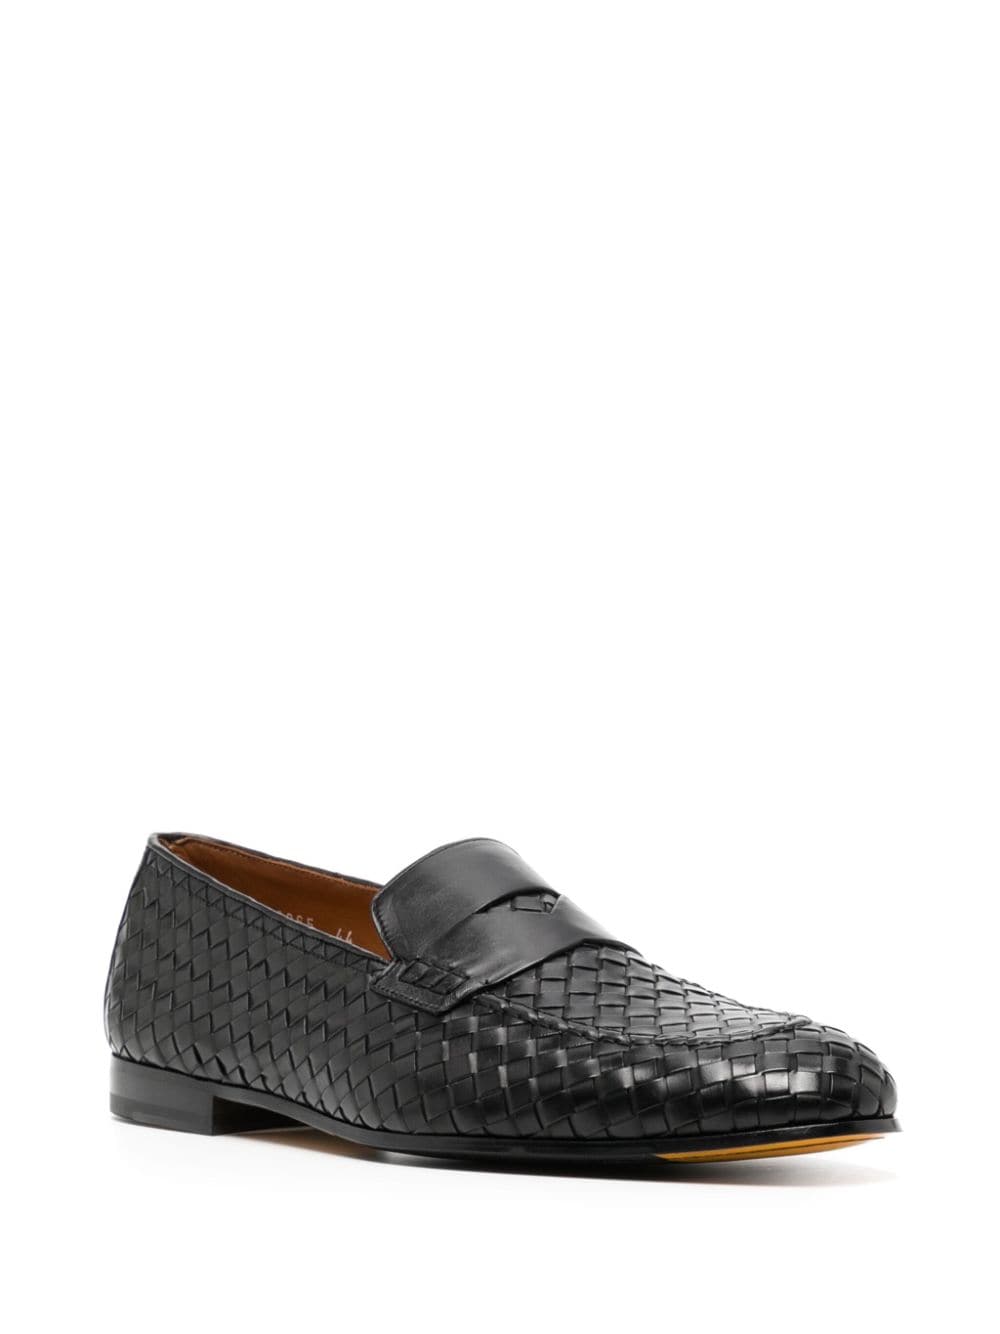 Image 2 of Doucal's woven leather penny loafers